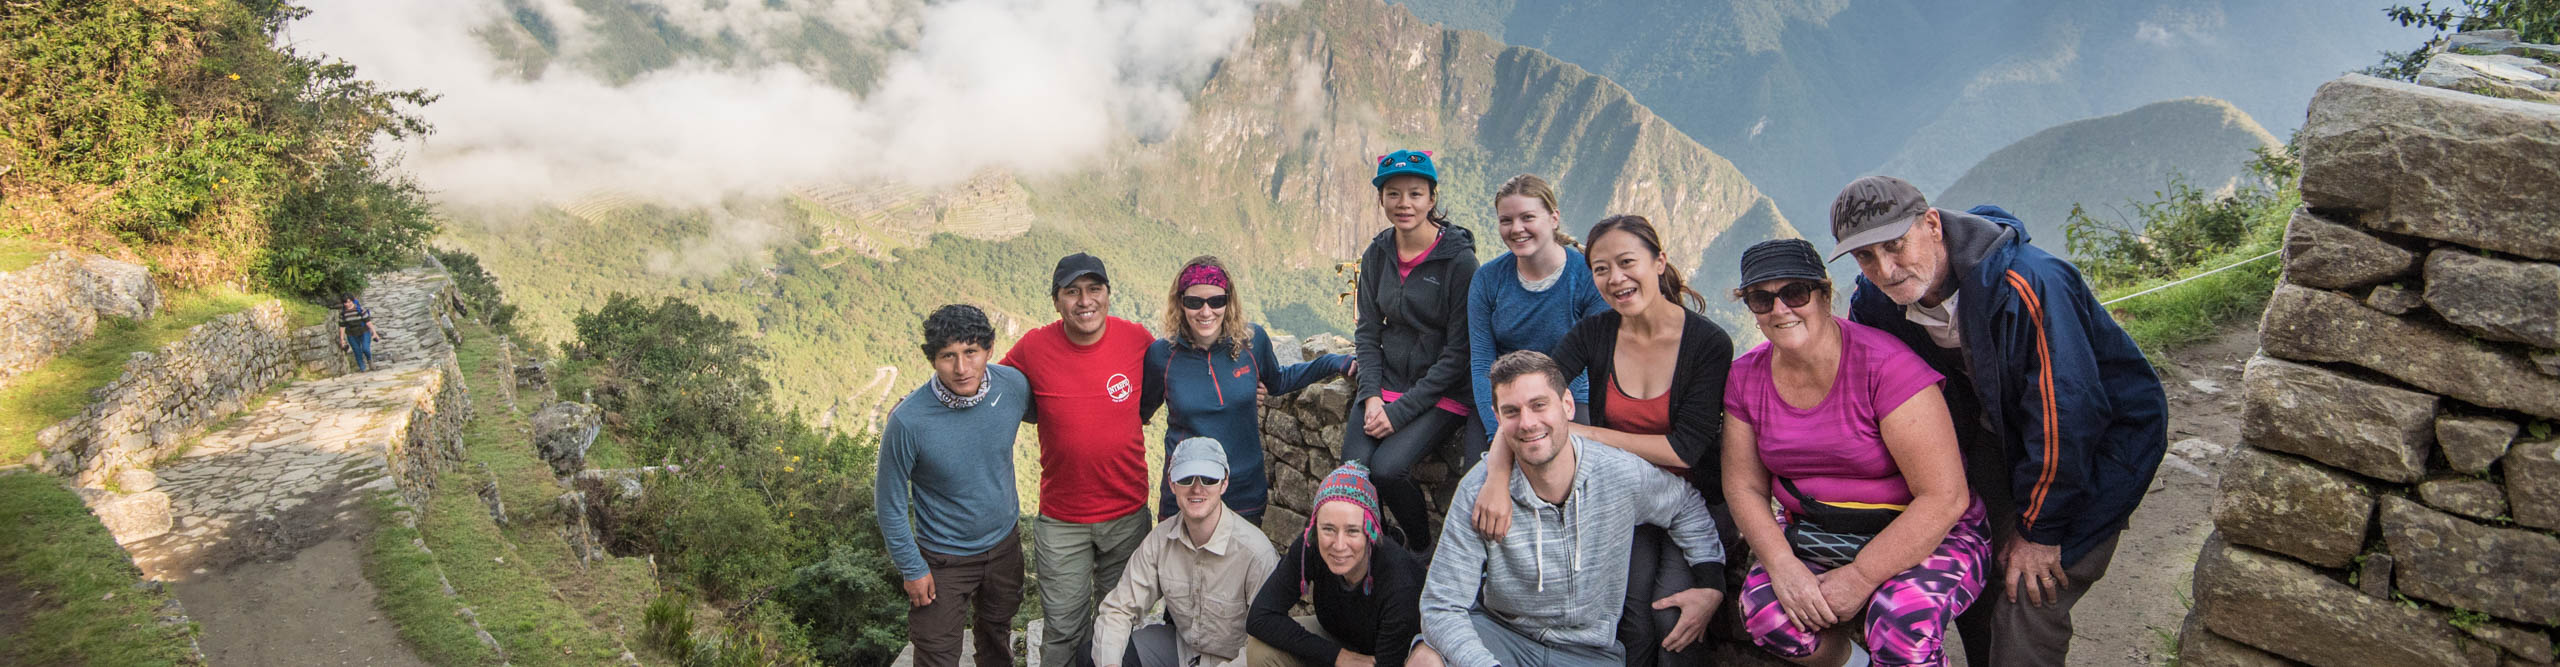 Hikers in a group photo with their guide on the trek to the Sun Gate at Machu Picchu, Peru